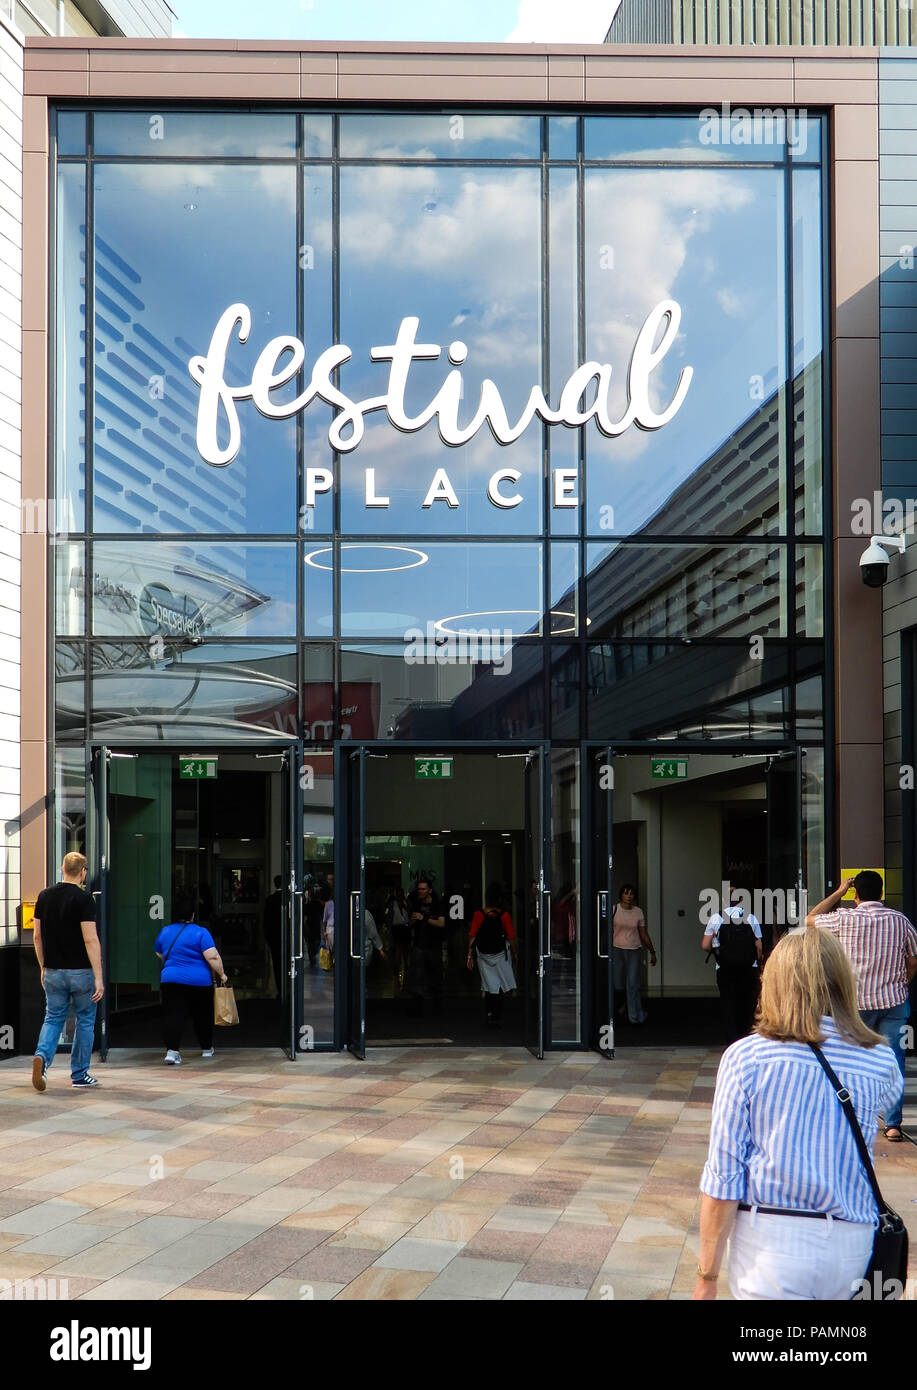 Basingstoke, United Kingdom - July 05 2018:   The Entrance to Festival Place shoppng centre from the Malls Stock Photo